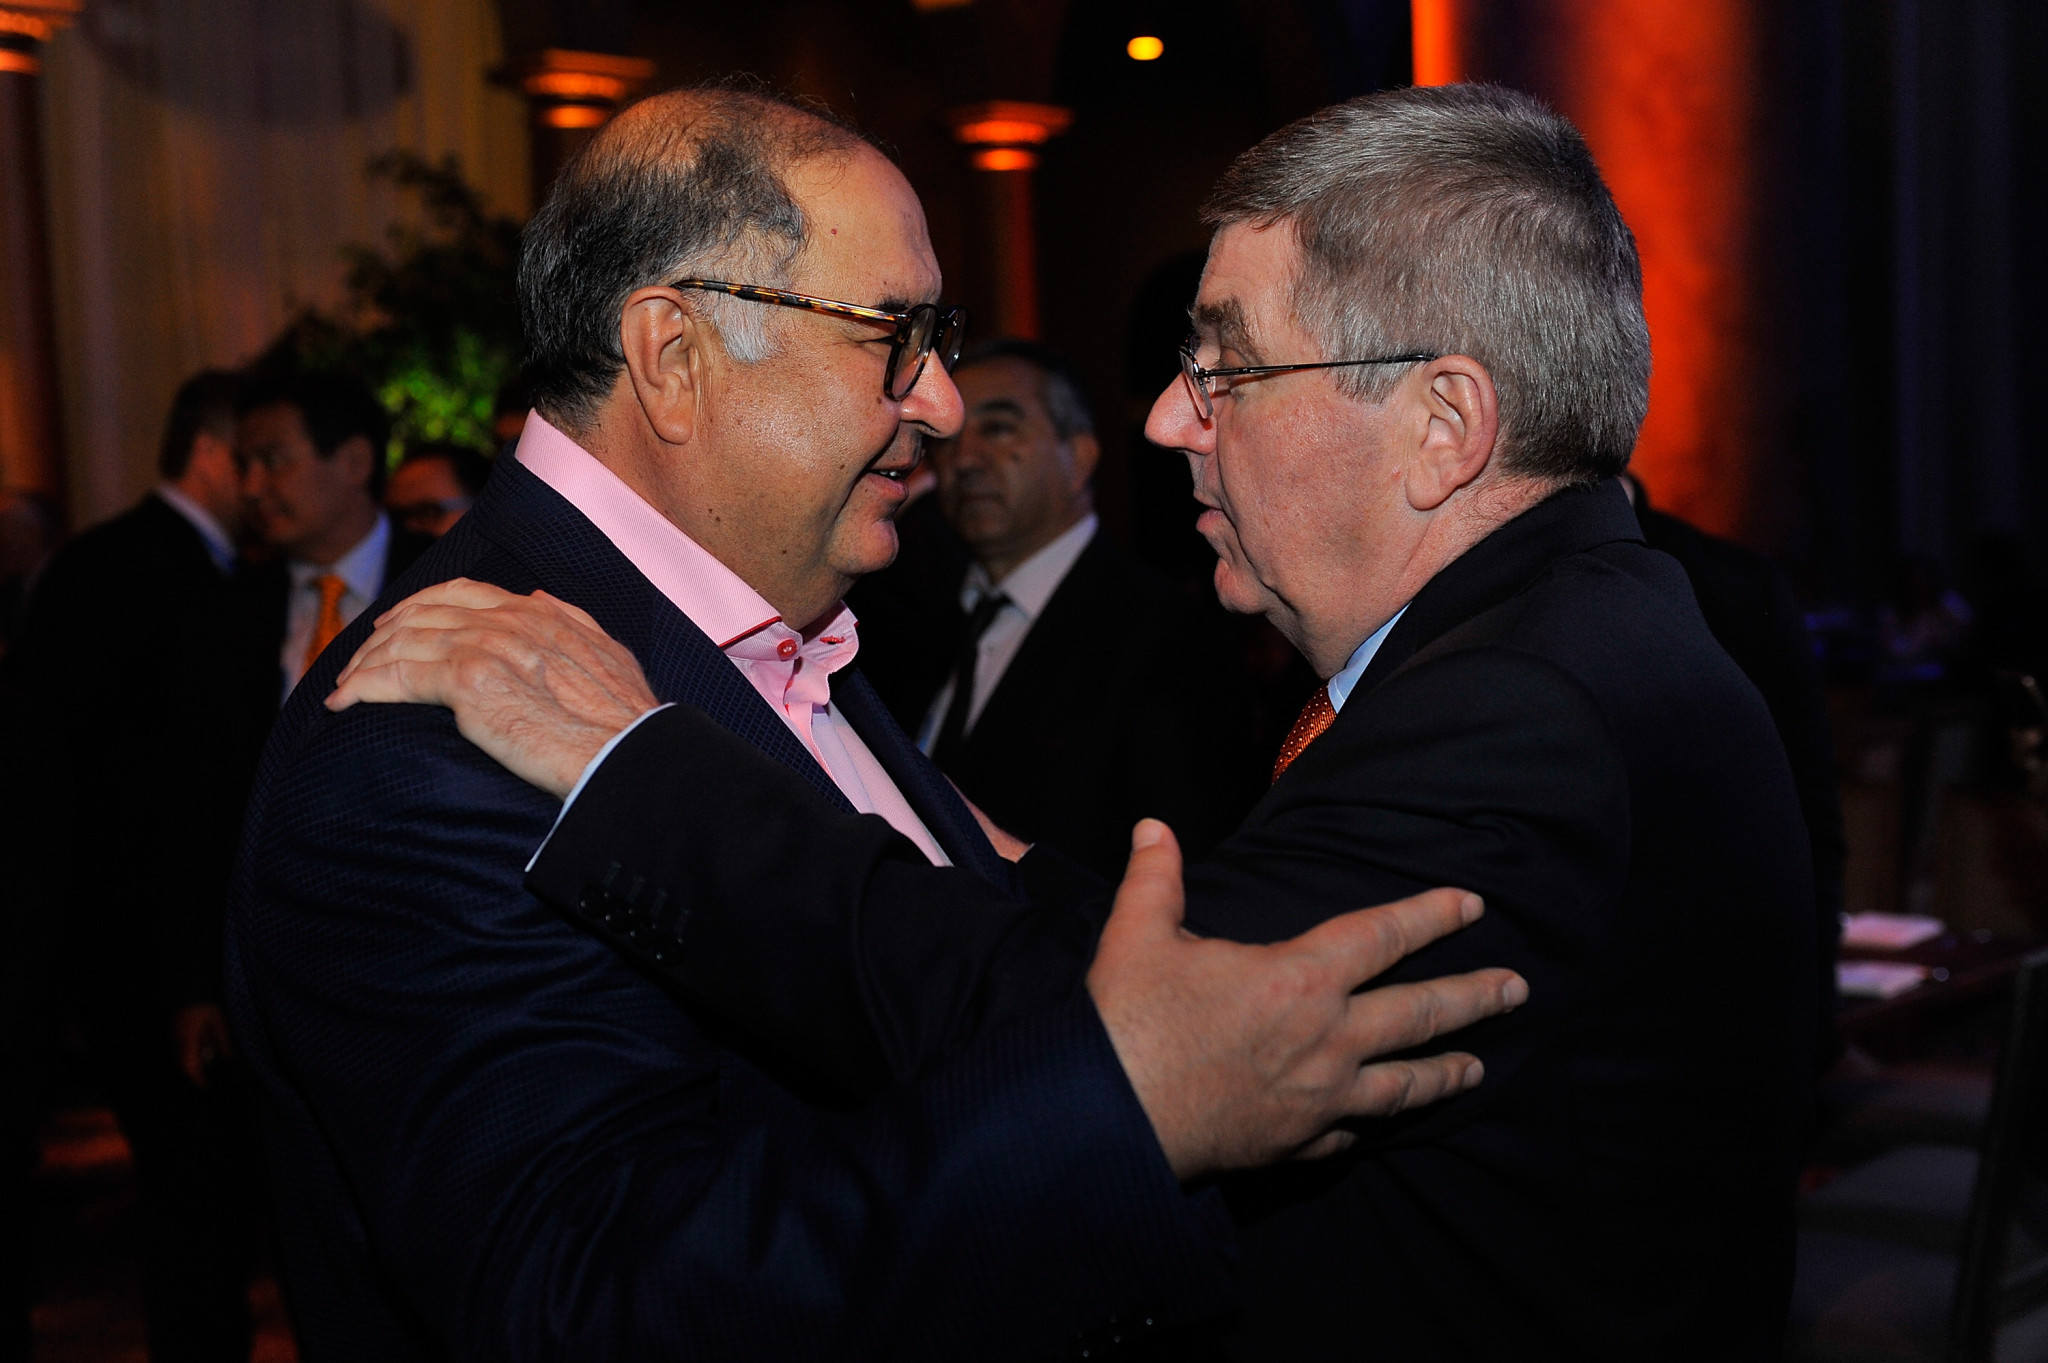 Usmanov calls for IOC Executive Board to overturn decision on neutral Russian participation at Pyeongchang 2018